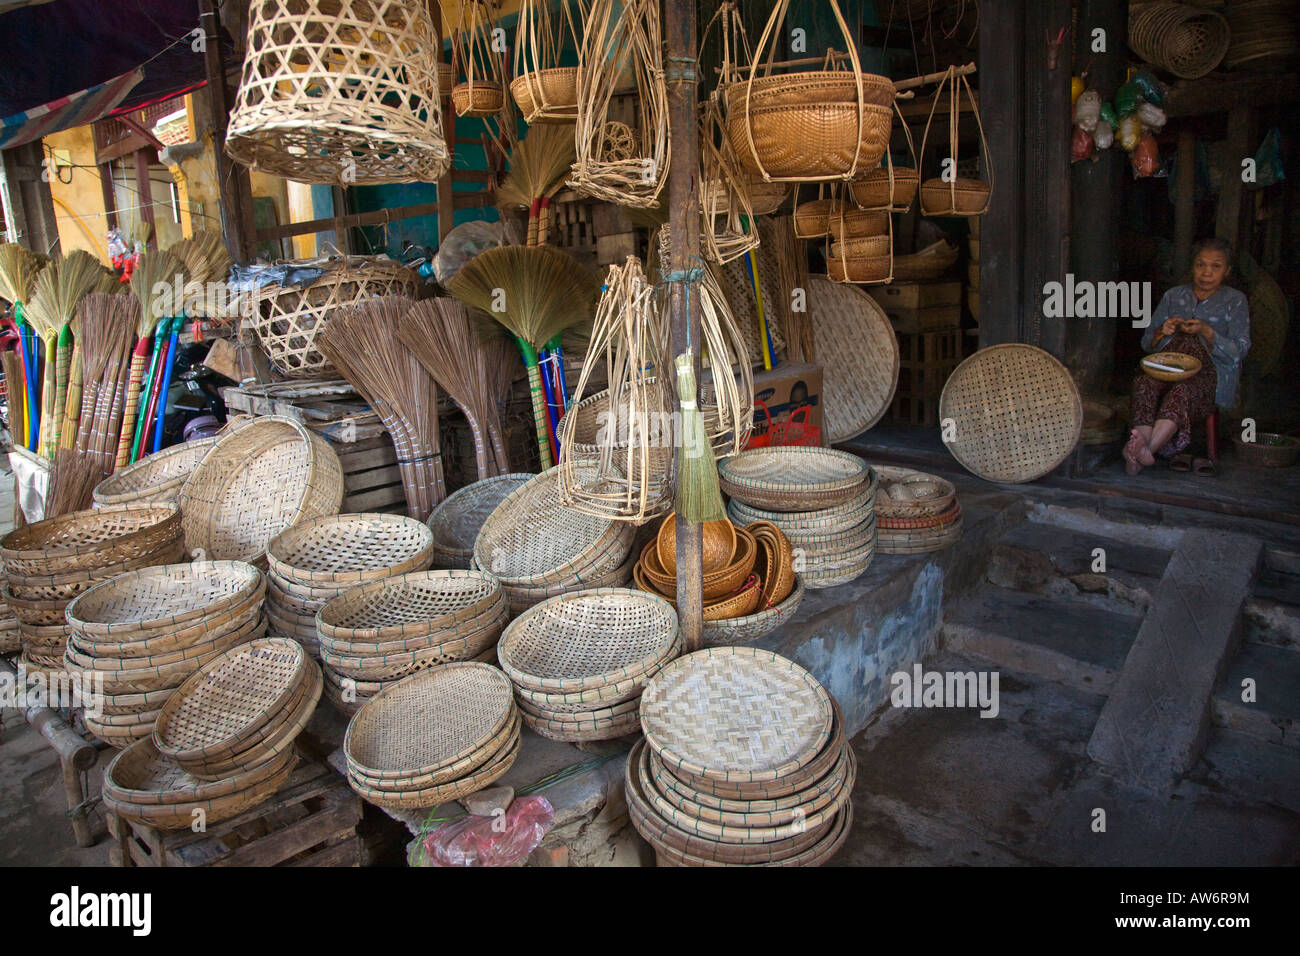 A merchant oversees a large display of WOVEN BASKETS and BROOMS in the village of HOI AN VIETNAM Stock Photo